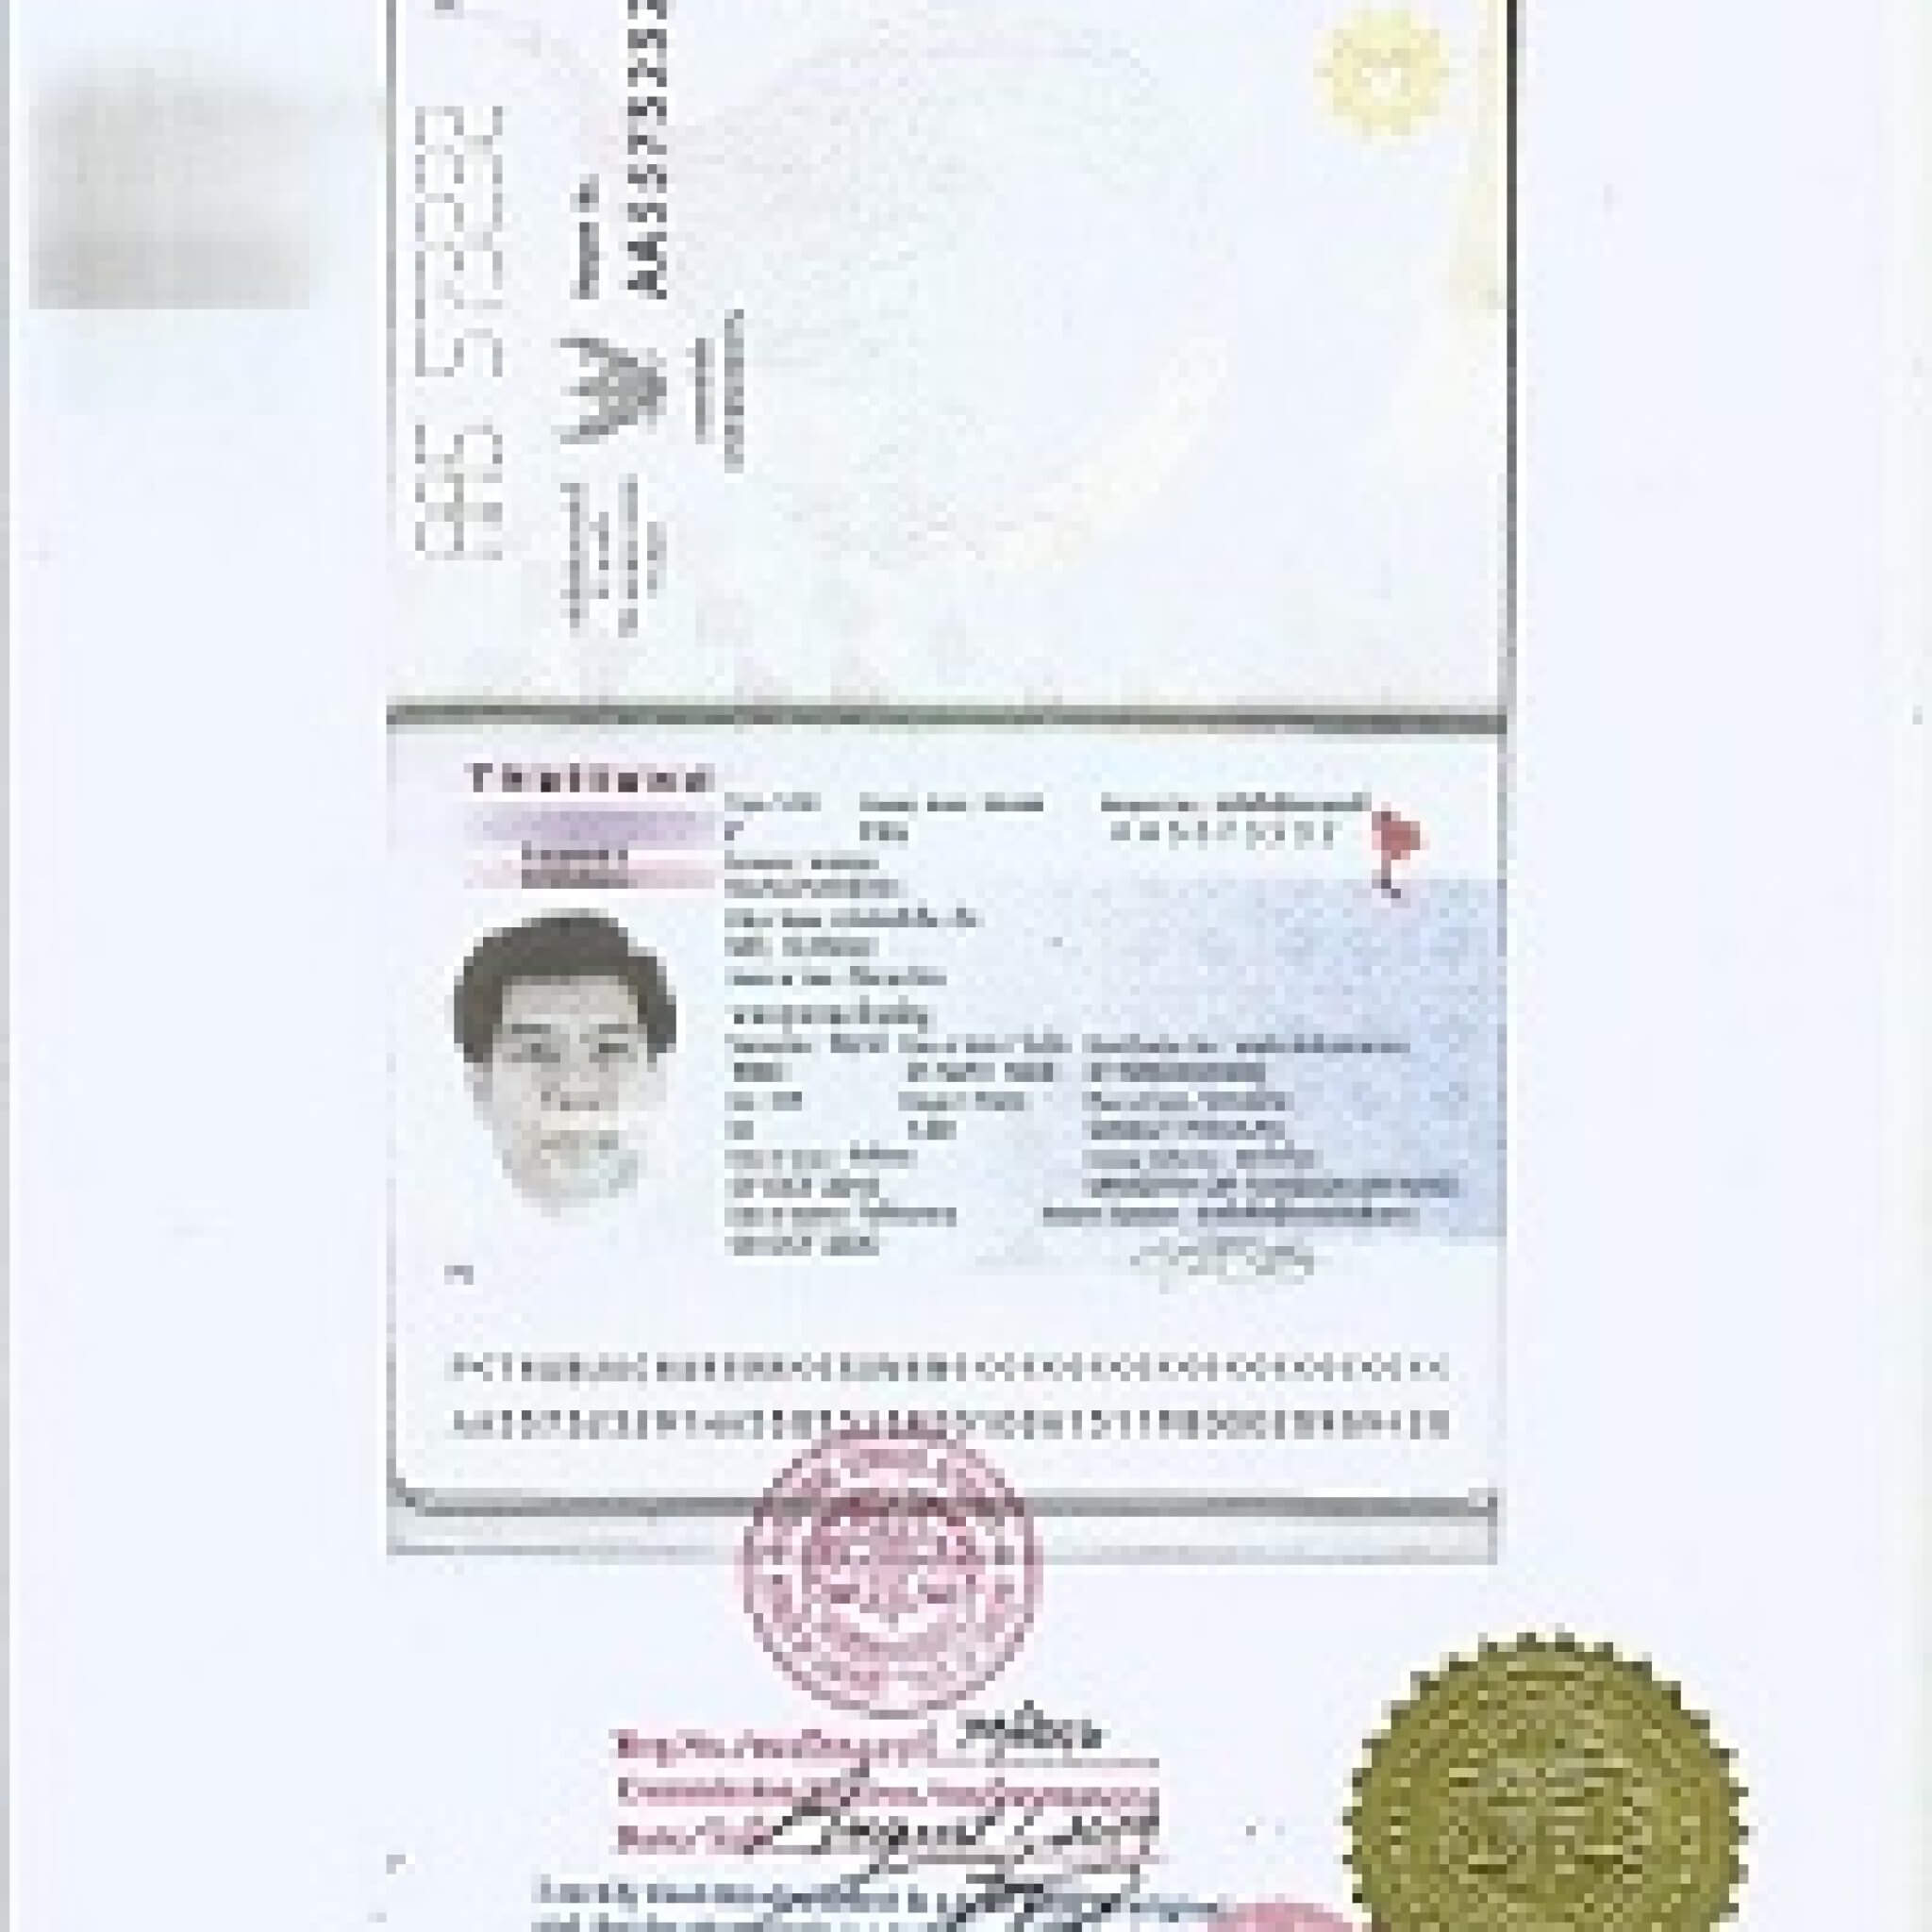 how to get a certified copy of passport uk